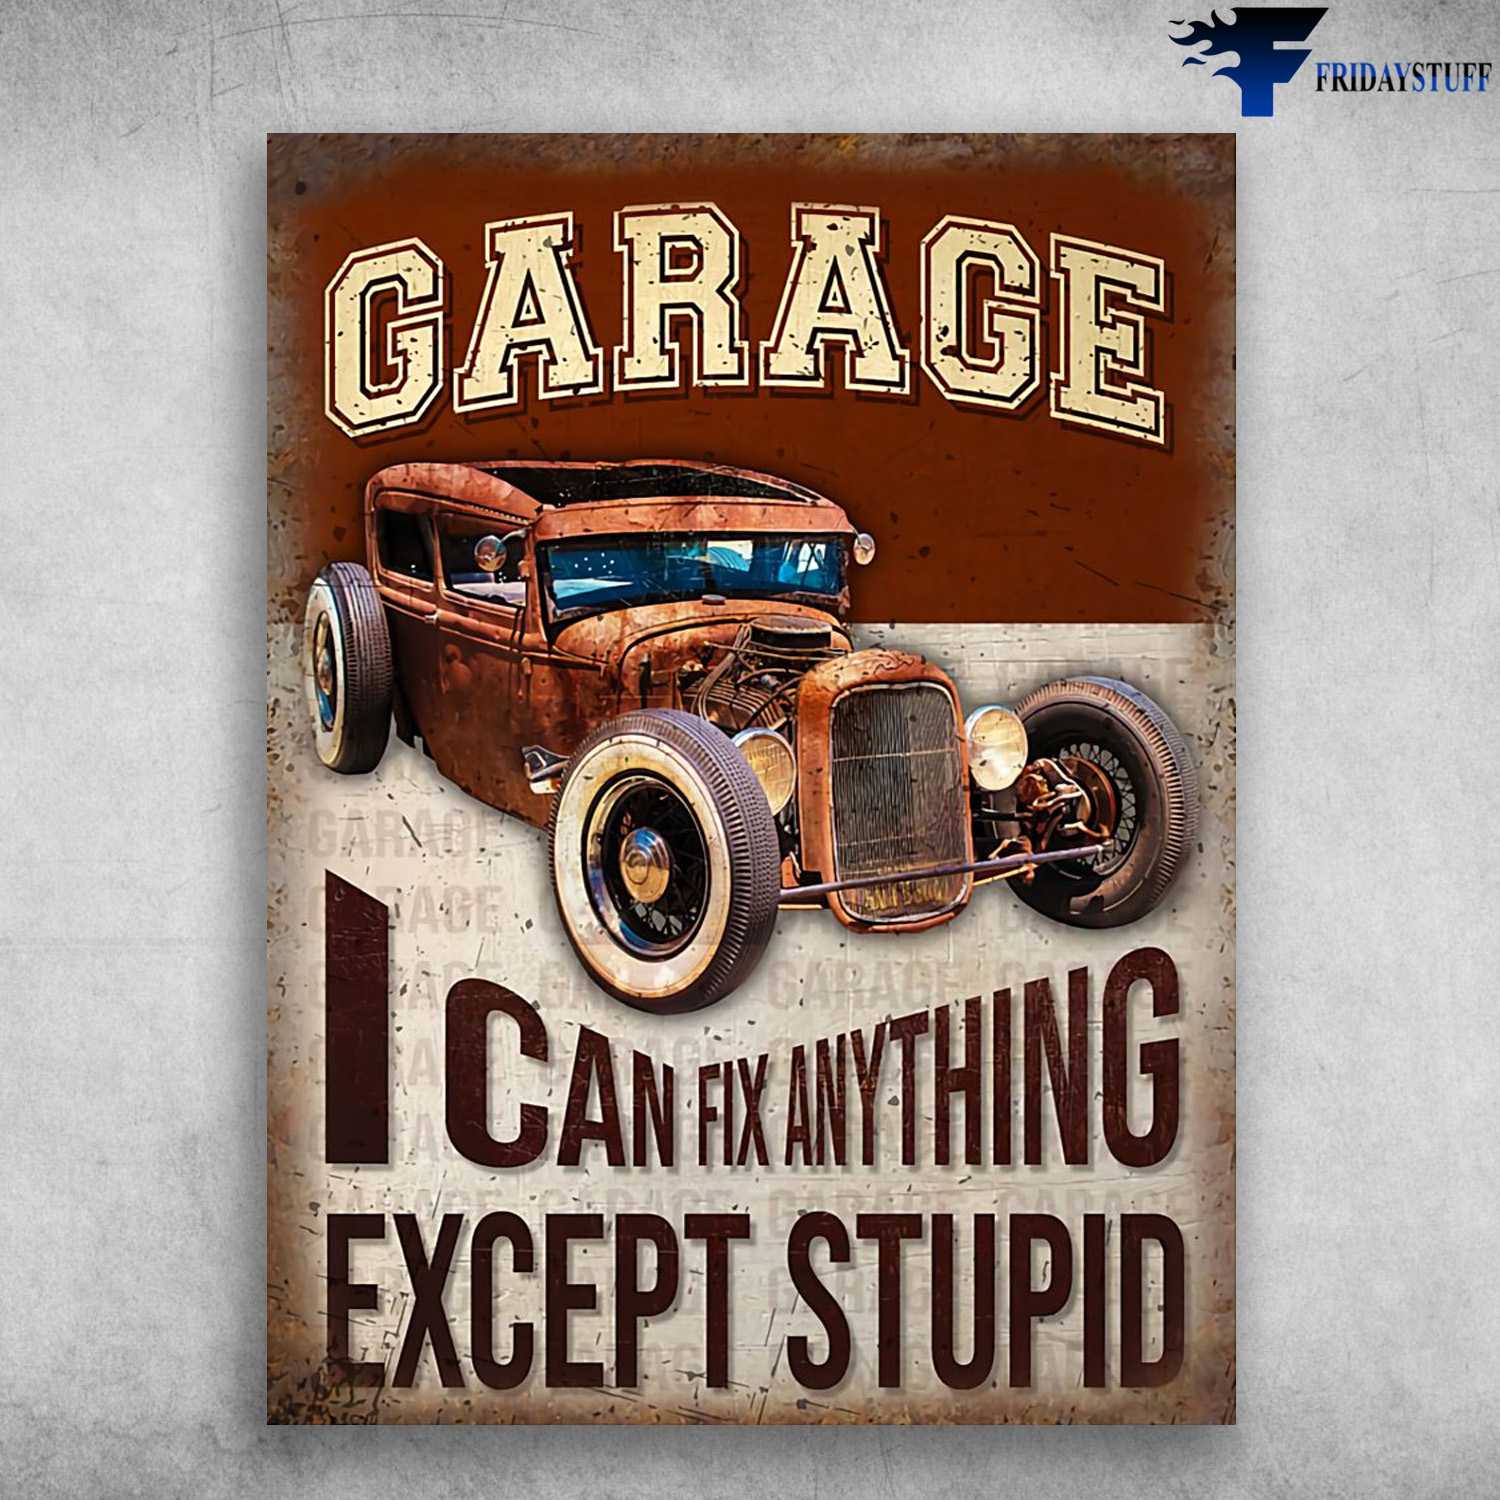 Hot Rod Garage, Garage Poster - I Can Fix Anything, Except Stupid